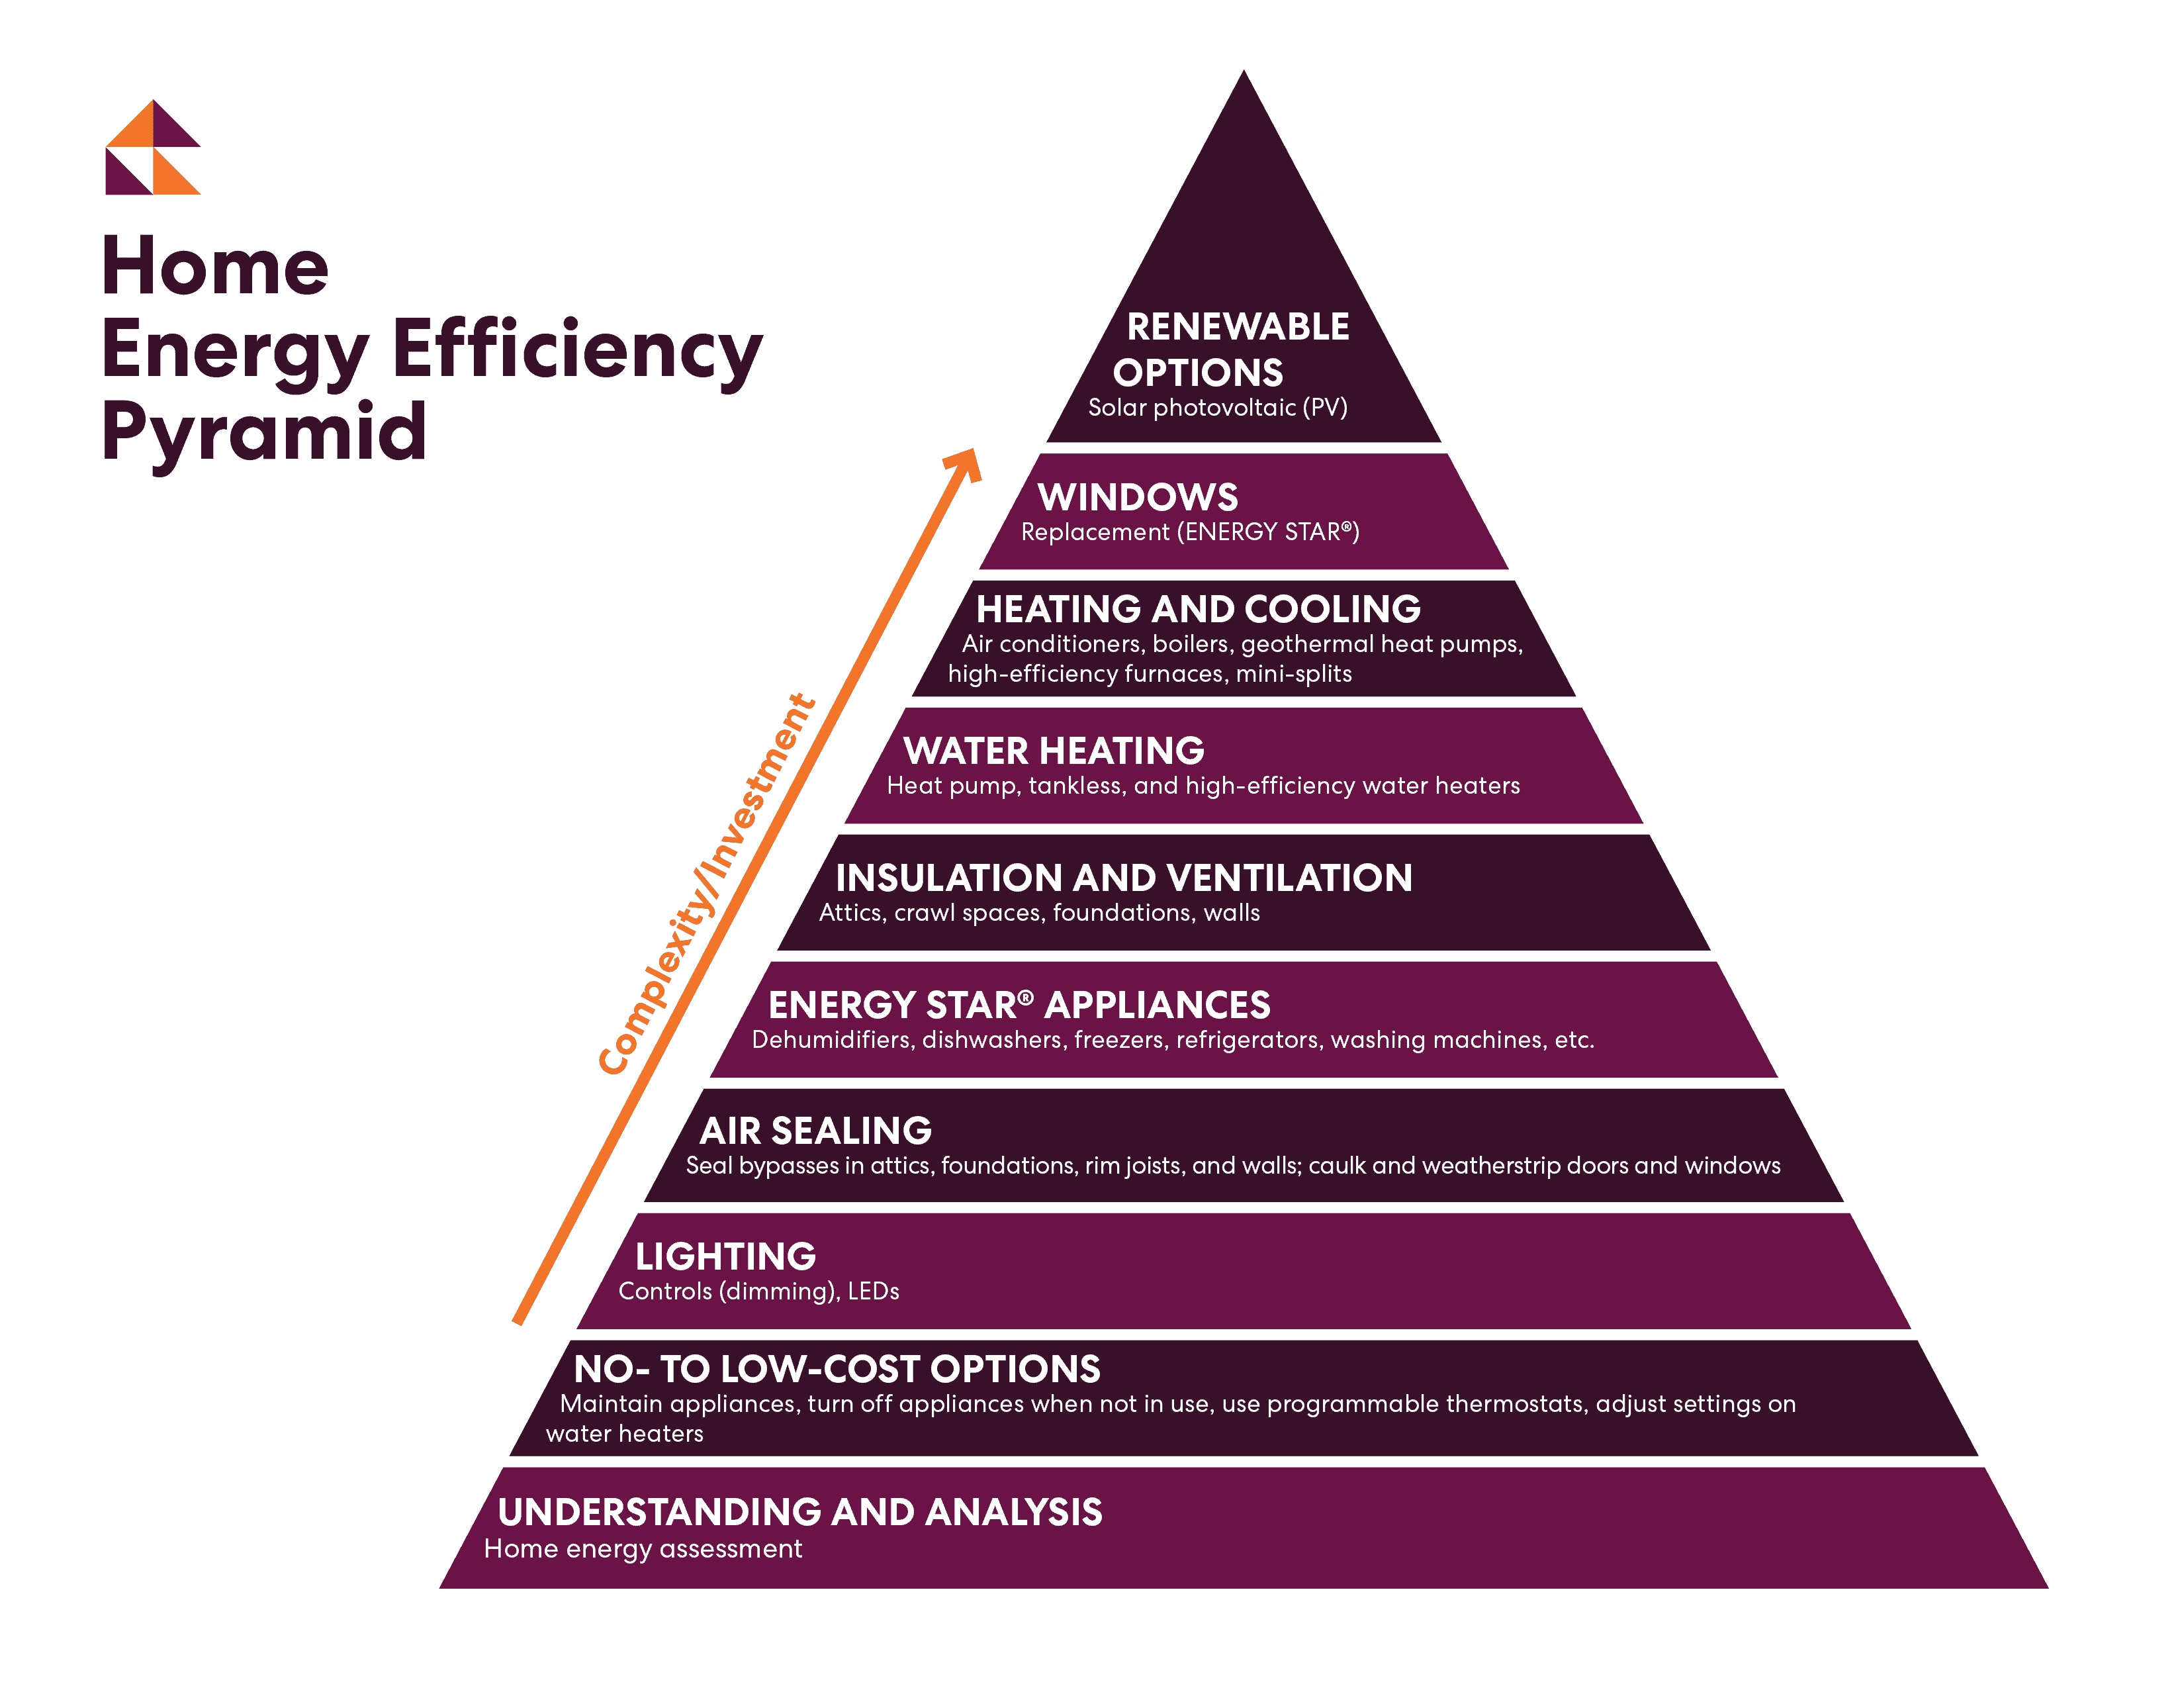 Home Energy Efficiency Pyramid - Renewable Options, Windows, Heating and Cooling, Water Heating, Insulation and Ventilation, Energy Star® Appliances, Air Sealing, Lighting ,No-to Low-Cost Options, and Understanding and Analysis